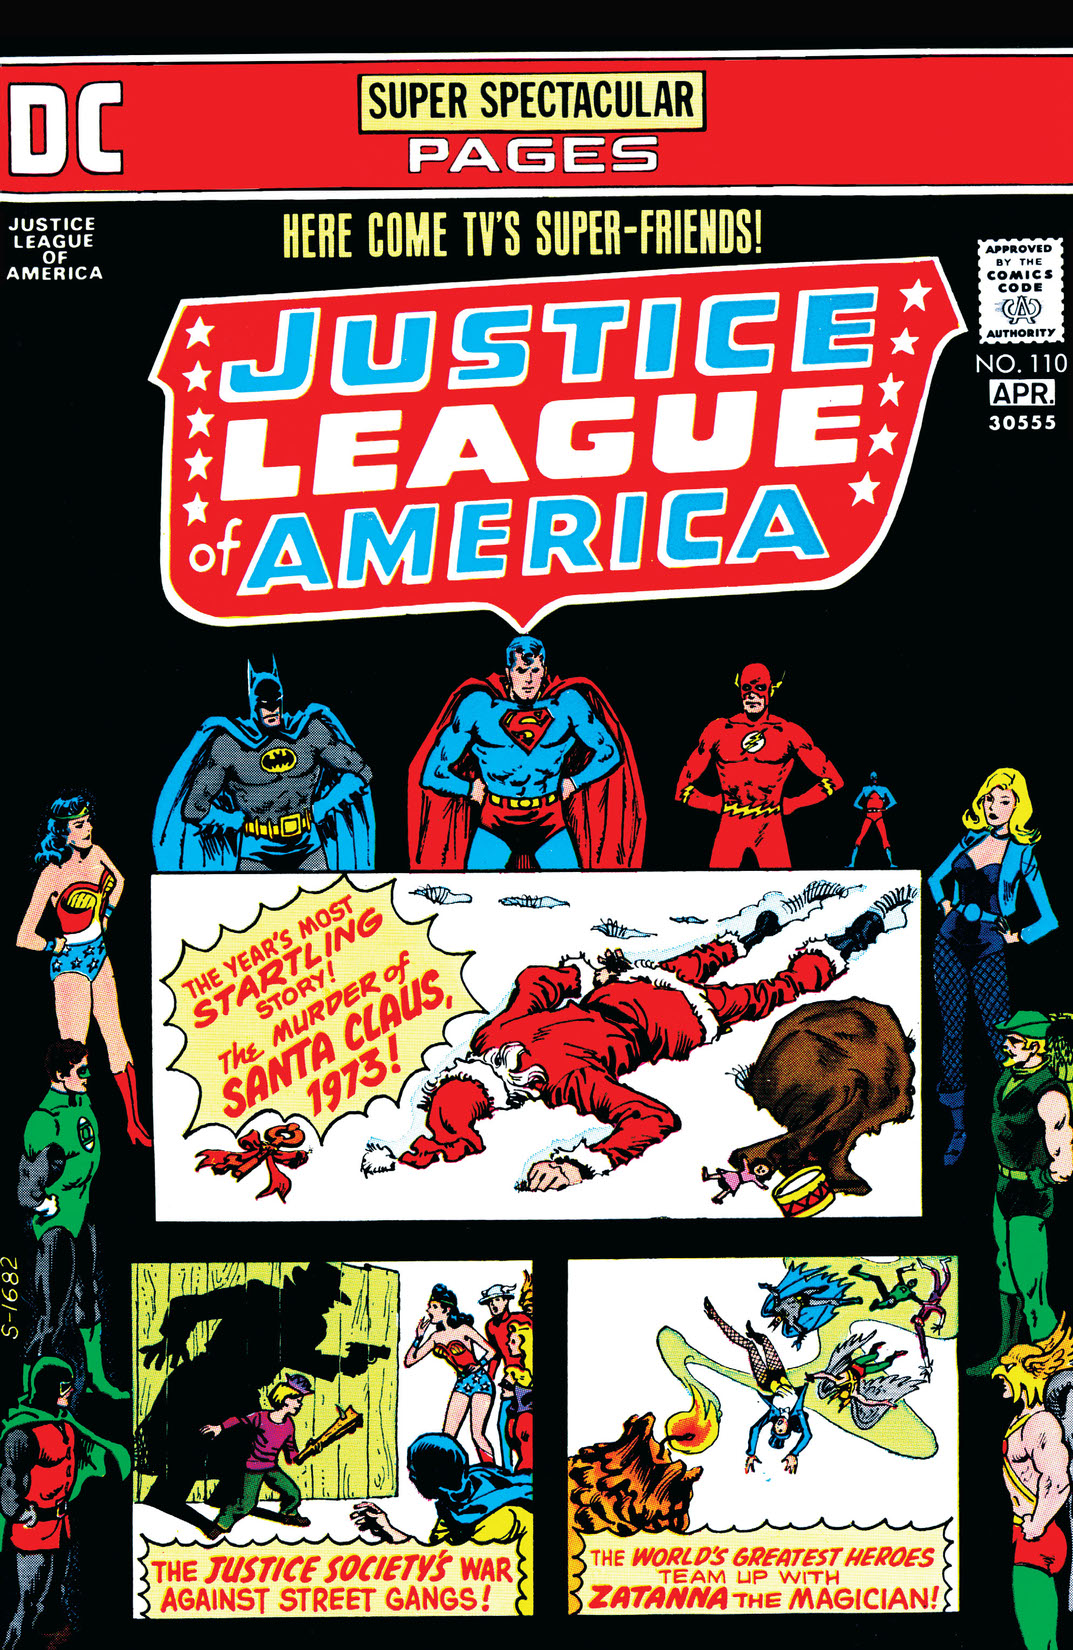 Justice League of America (1960-) #110 preview images